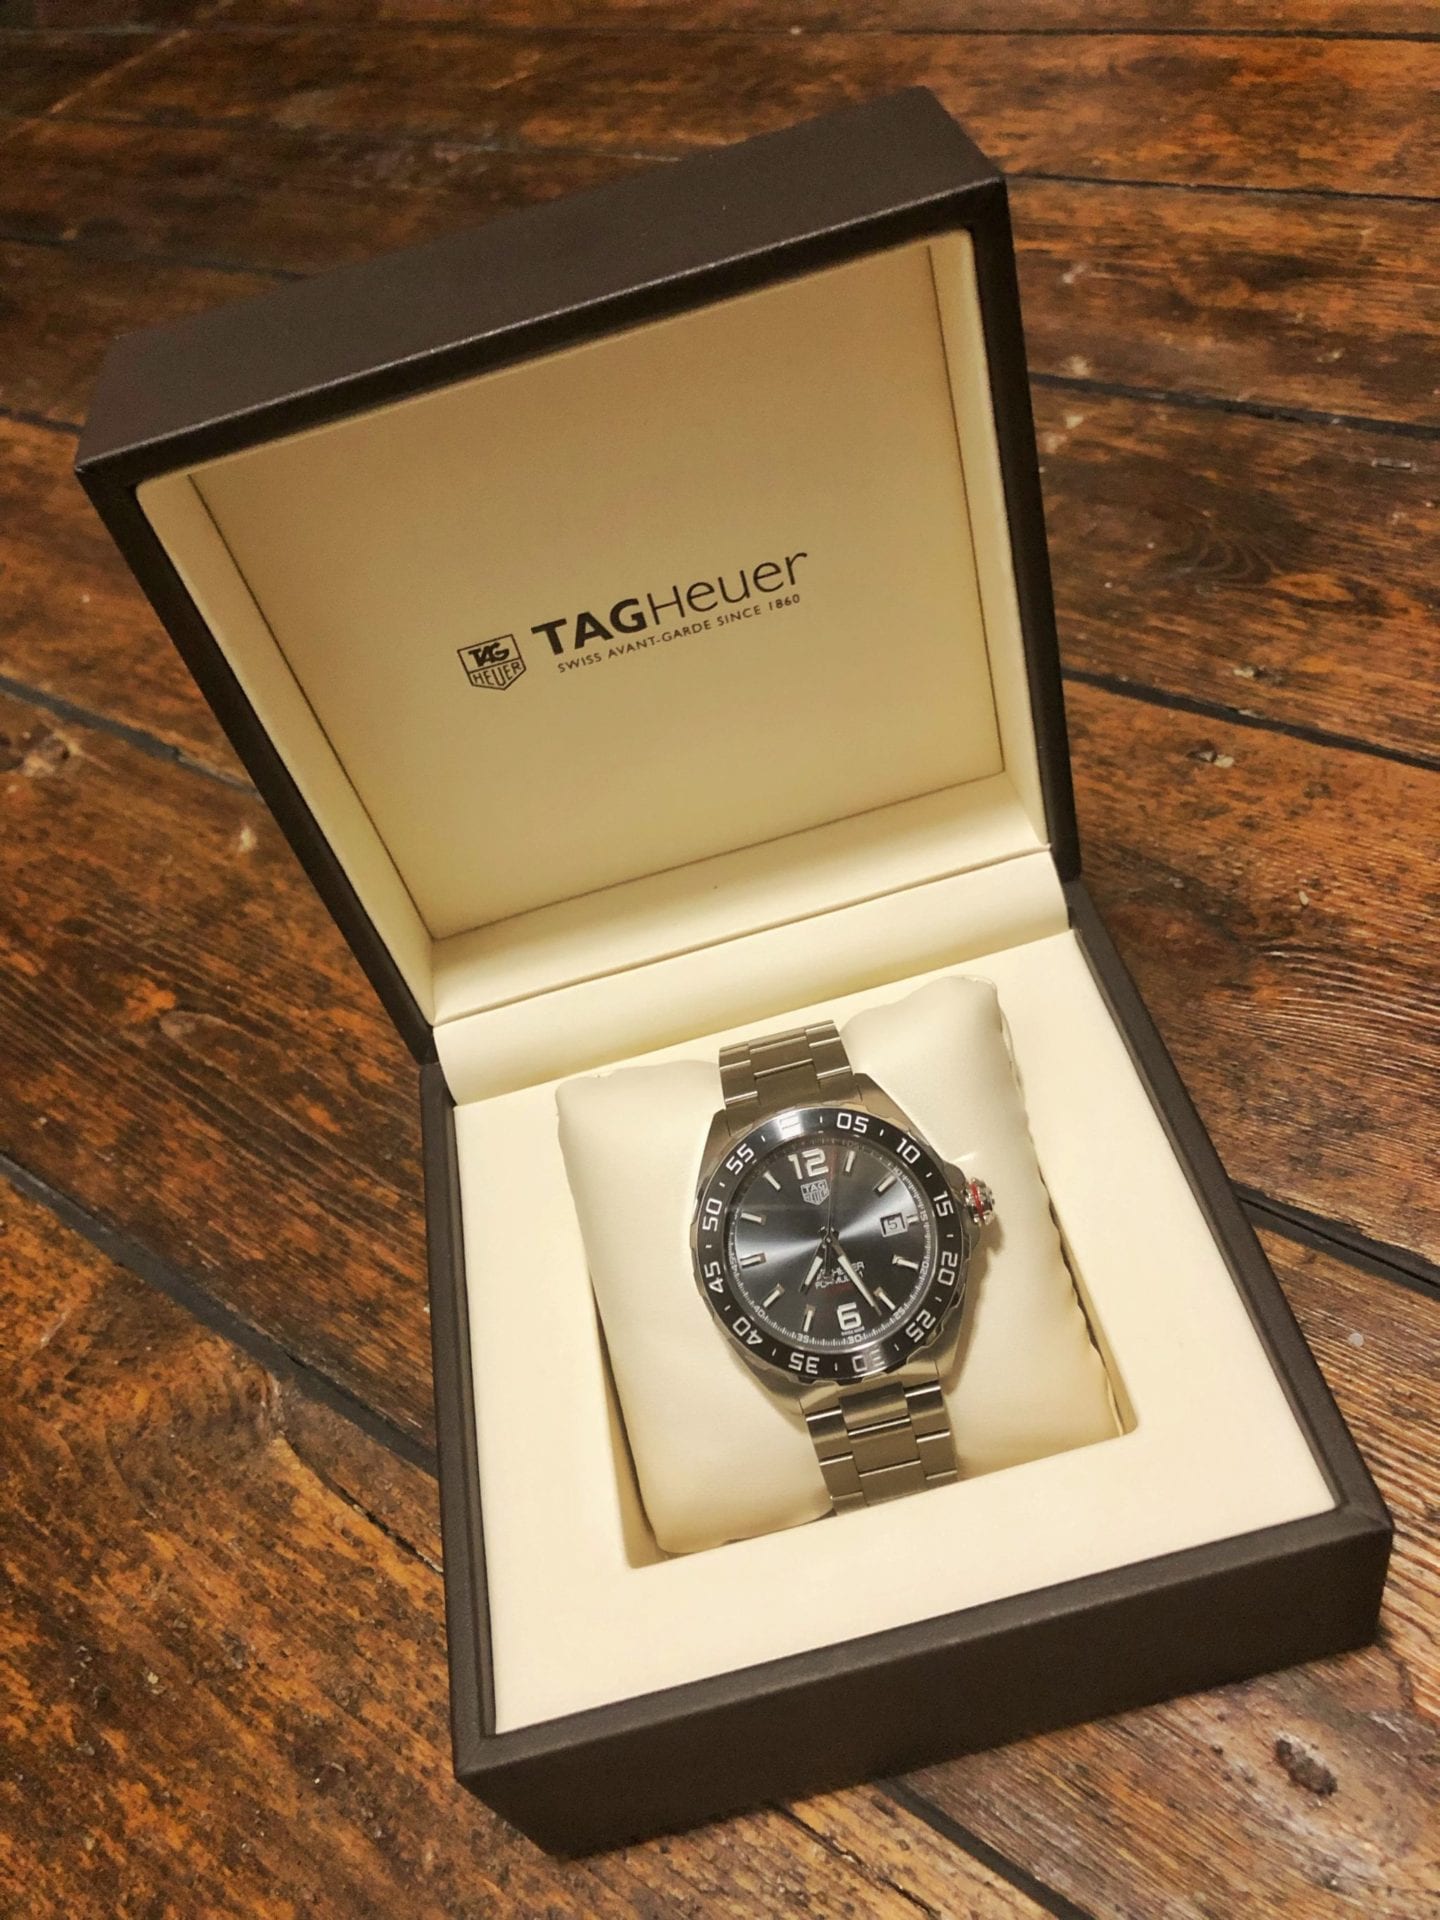 My Tag Heuer buying experience - The Travelling Salesman